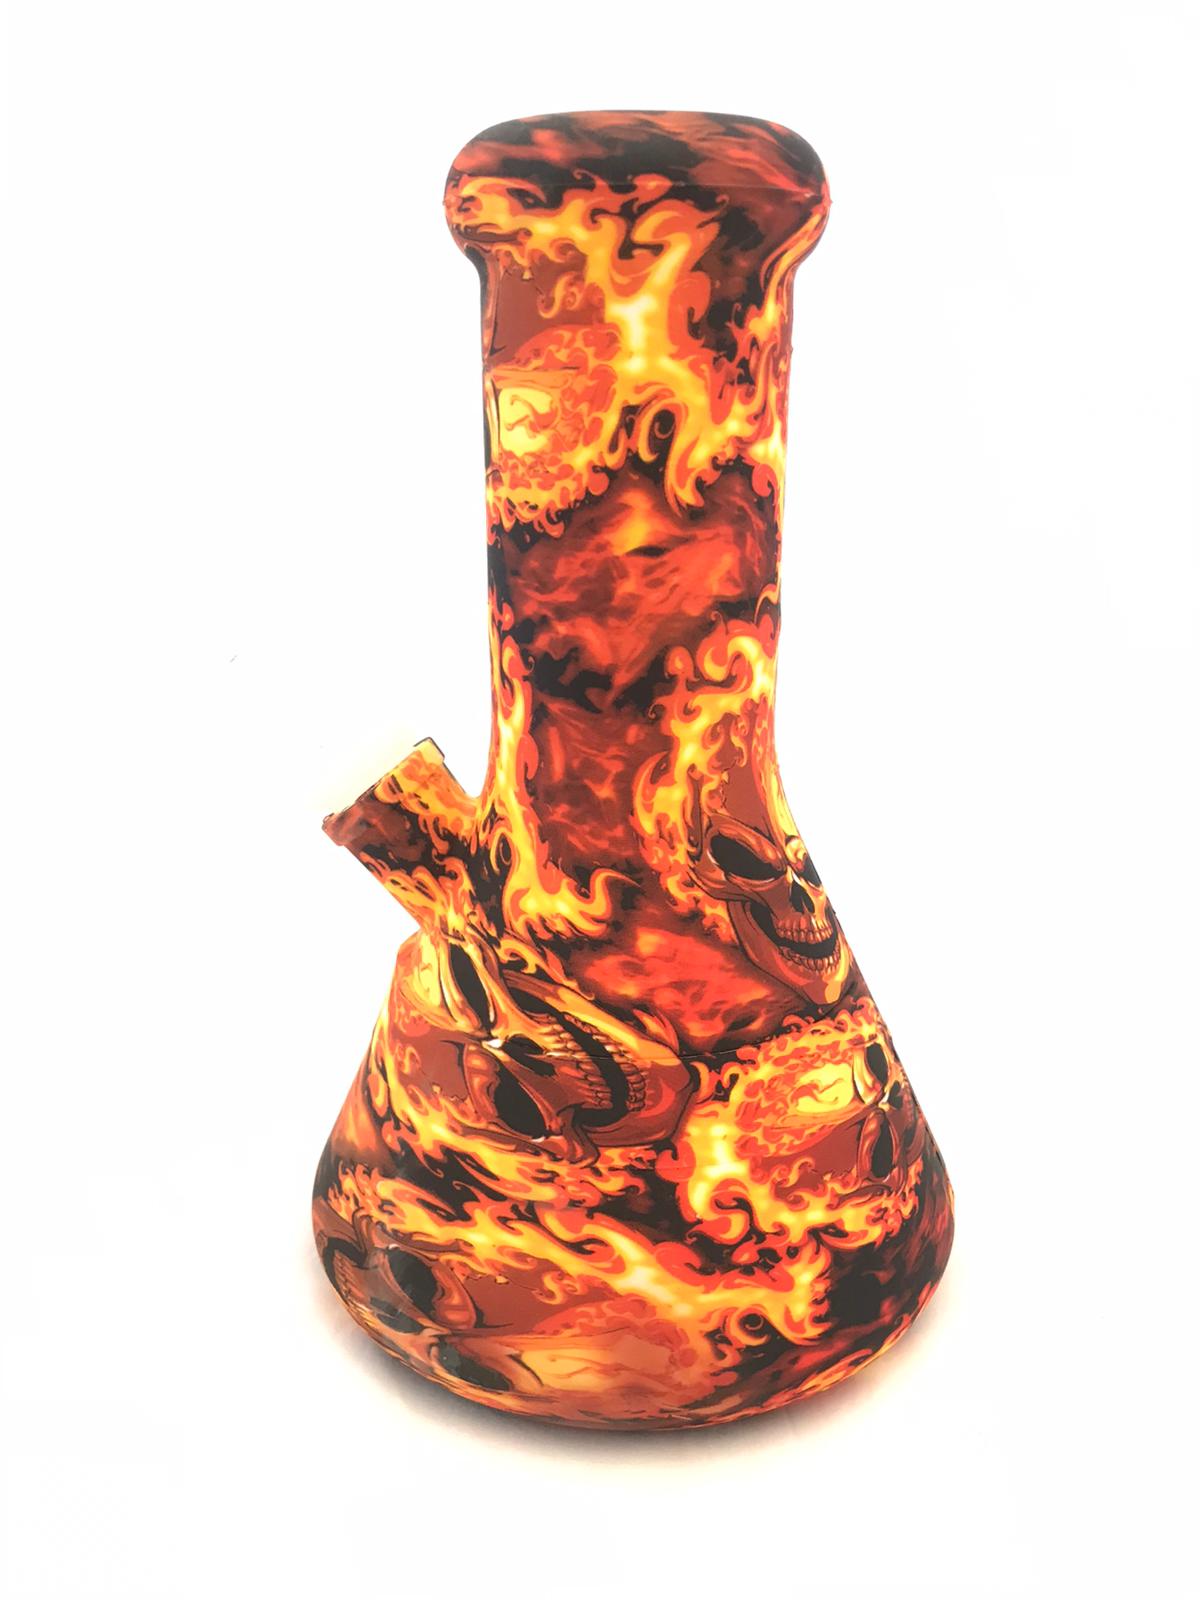 Silicon classic lab bong printed 10" Size SKULL FLAME